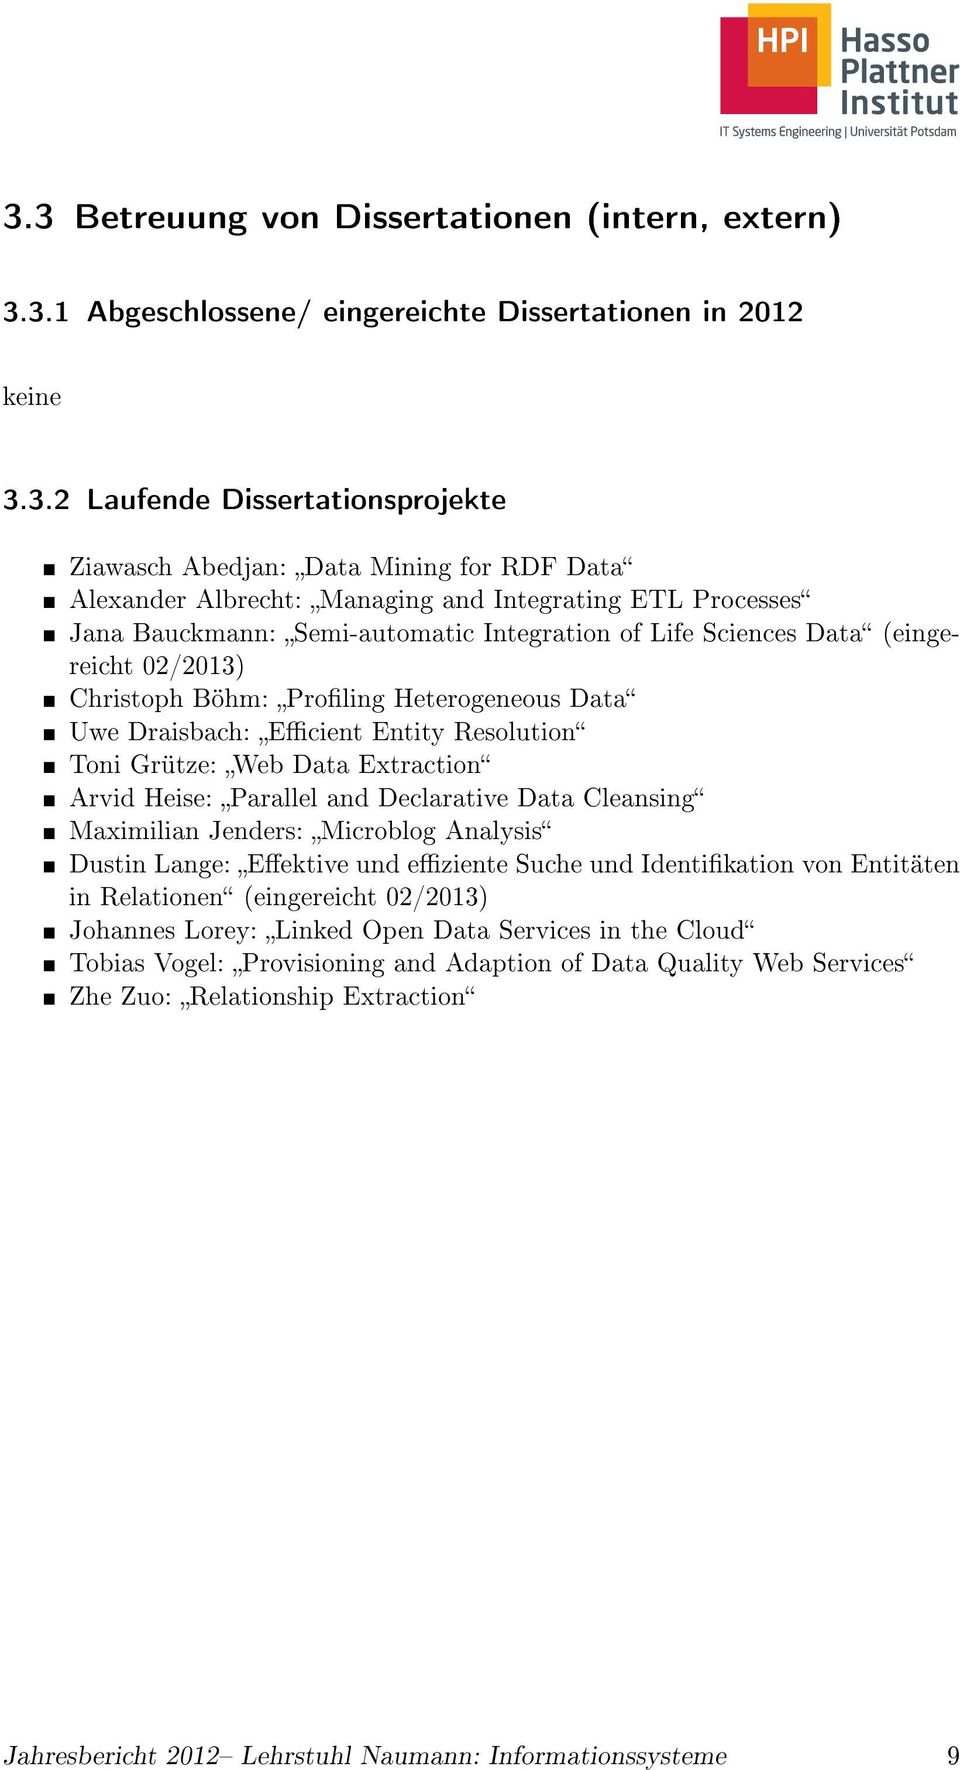 Draisbach: Ecient Entity Resolution Toni Grütze: Web Data Extraction Arvid Heise: Parallel and Declarative Data Cleansing Maximilian Jenders: Microblog Analysis Dustin Lange: Eektive und eziente